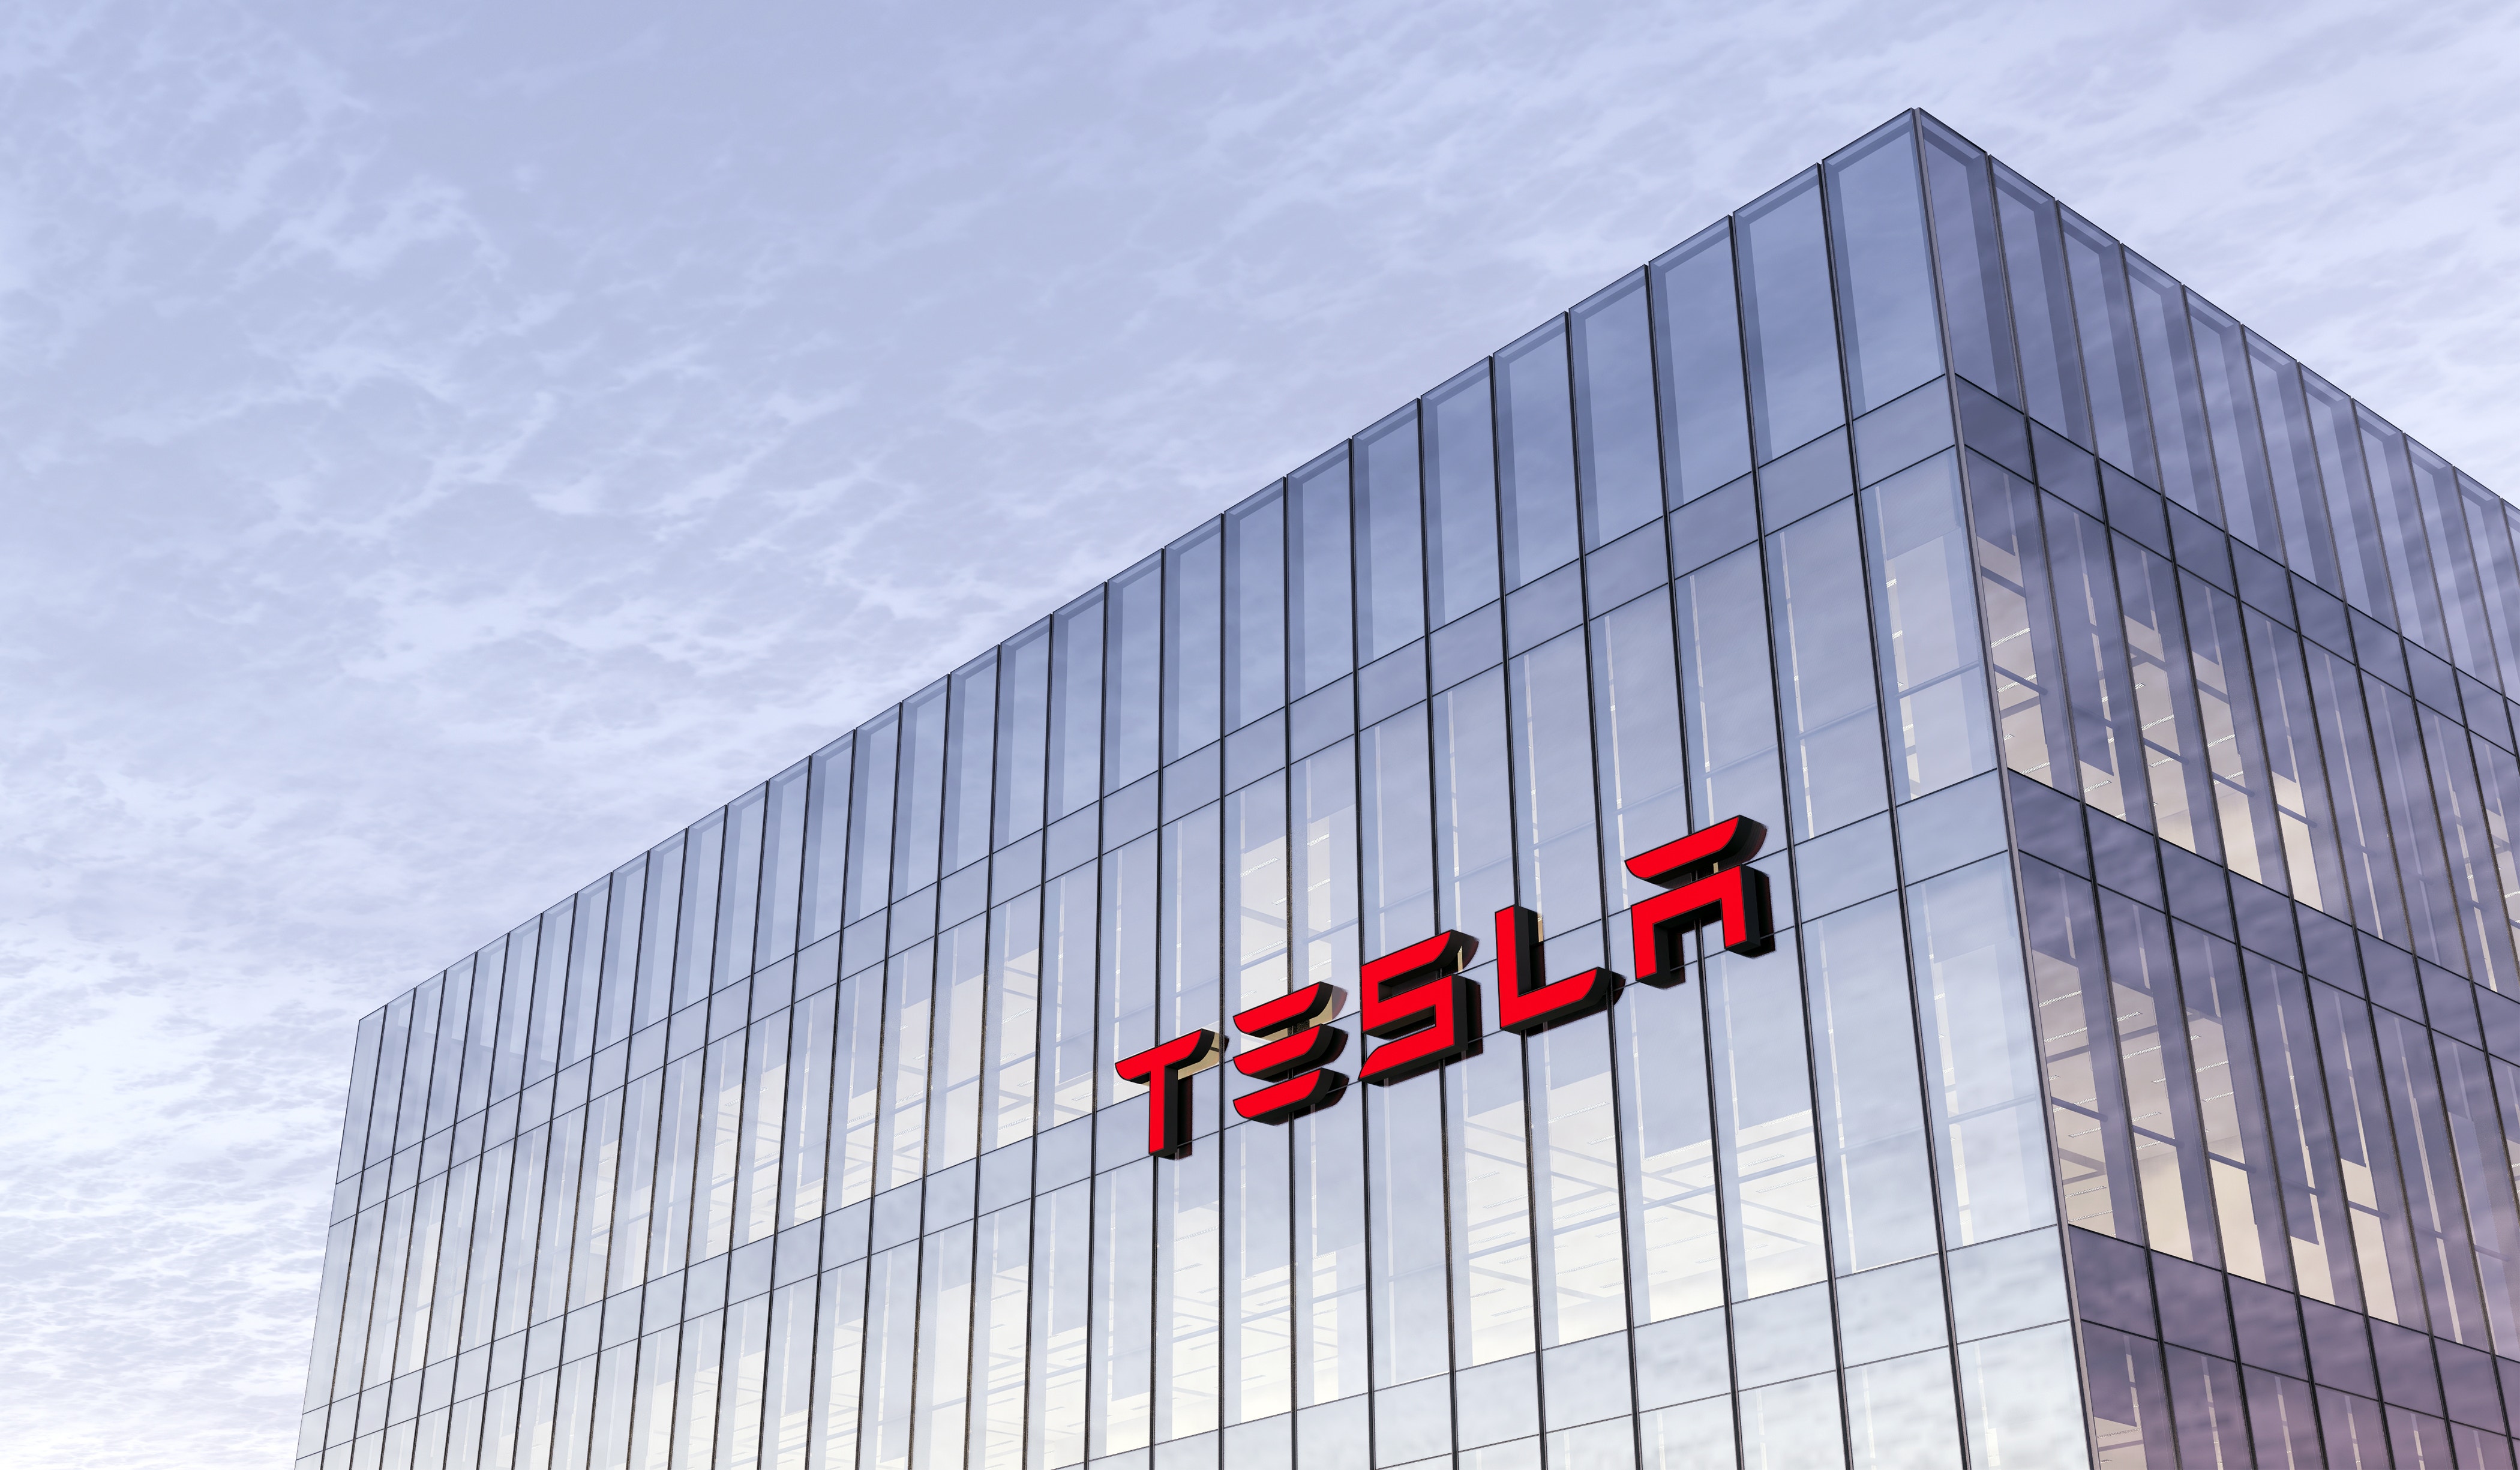 Is Tesla The New Apple? Fund Manager Says Elon Musk's Company Will Be 'Much, Much Bigger'